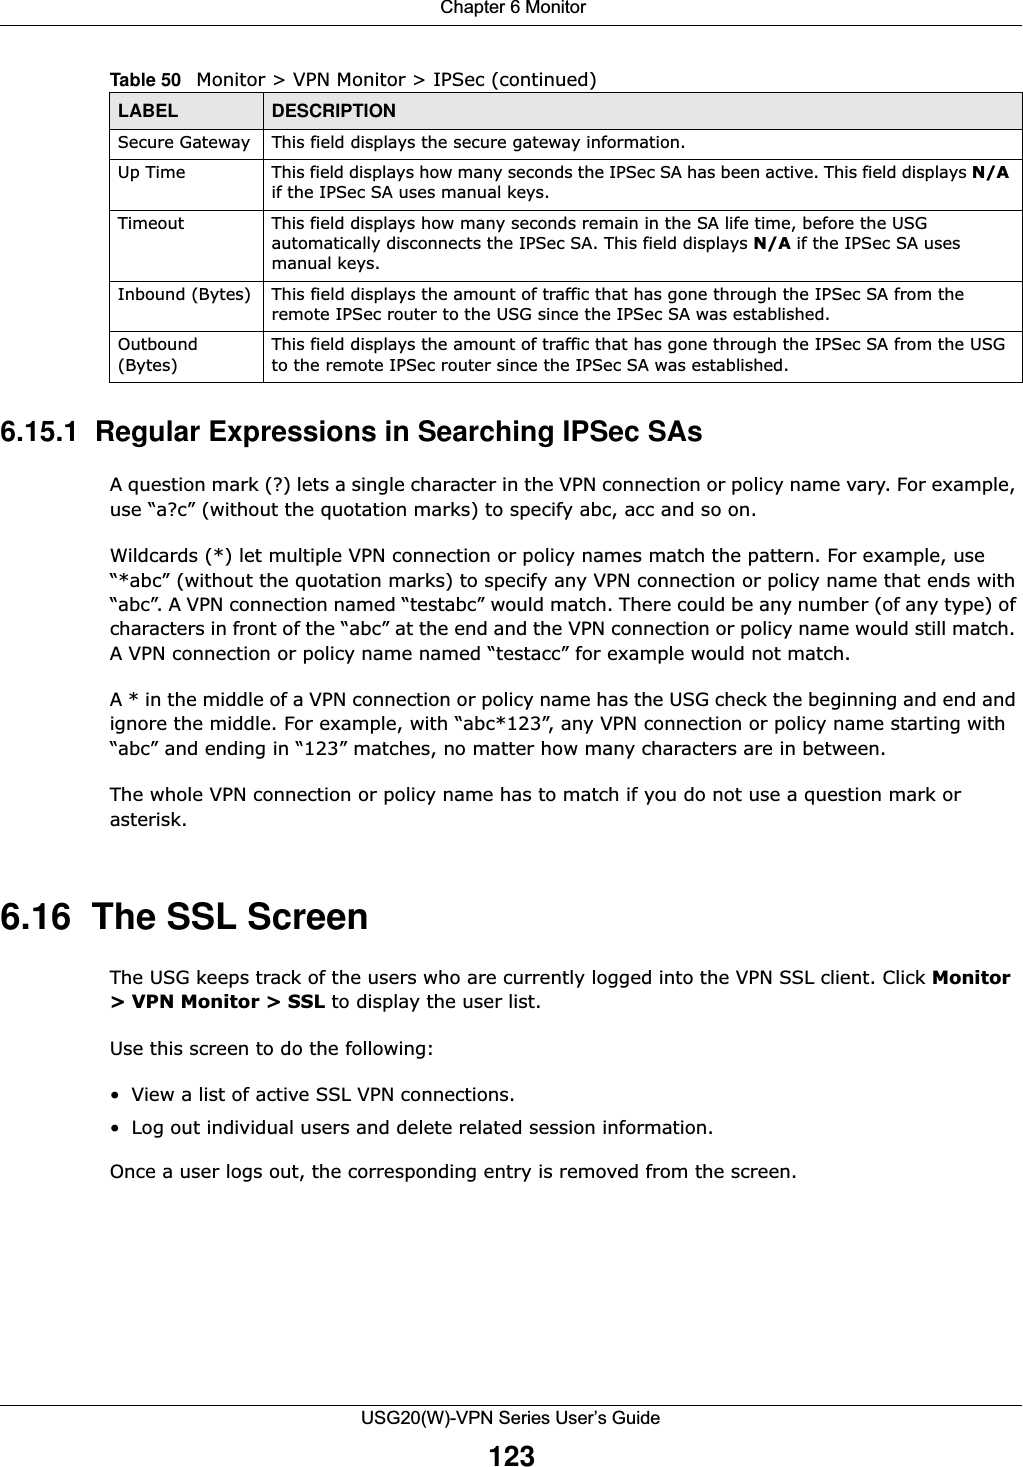  Chapter 6 MonitorUSG20(W)-VPN Series User’s Guide1236.15.1  Regular Expressions in Searching IPSec SAsA question mark (?) lets a single character in the VPN connection or policy name vary. For example, use “a?c” (without the quotation marks) to specify abc, acc and so on. Wildcards (*) let multiple VPN connection or policy names match the pattern. For example, use “*abc” (without the quotation marks) to specify any VPN connection or policy name that ends with “abc”. A VPN connection named “testabc” would match. There could be any number (of any type) of characters in front of the “abc” at the end and the VPN connection or policy name would still match. A VPN connection or policy name named “testacc” for example would not match. A * in the middle of a VPN connection or policy name has the USG check the beginning and end and ignore the middle. For example, with “abc*123”, any VPN connection or policy name starting with “abc” and ending in “123” matches, no matter how many characters are in between.The whole VPN connection or policy name has to match if you do not use a question mark or asterisk. 6.16  The SSL Screen The USG keeps track of the users who are currently logged into the VPN SSL client. Click Monitor &gt; VPN Monitor &gt; SSL to display the user list. Use this screen to do the following: • View a list of active SSL VPN connections. • Log out individual users and delete related session information. Once a user logs out, the corresponding entry is removed from the screen. Secure Gateway This field displays the secure gateway information.Up Time This field displays how many seconds the IPSec SA has been active. This field displays N/A if the IPSec SA uses manual keys.Timeout This field displays how many seconds remain in the SA life time, before the USG automatically disconnects the IPSec SA. This field displays N/A if the IPSec SA uses manual keys.Inbound (Bytes) This field displays the amount of traffic that has gone through the IPSec SA from the remote IPSec router to the USG since the IPSec SA was established.Outbound (Bytes)This field displays the amount of traffic that has gone through the IPSec SA from the USG to the remote IPSec router since the IPSec SA was established.Table 50   Monitor &gt; VPN Monitor &gt; IPSec (continued)LABEL DESCRIPTION